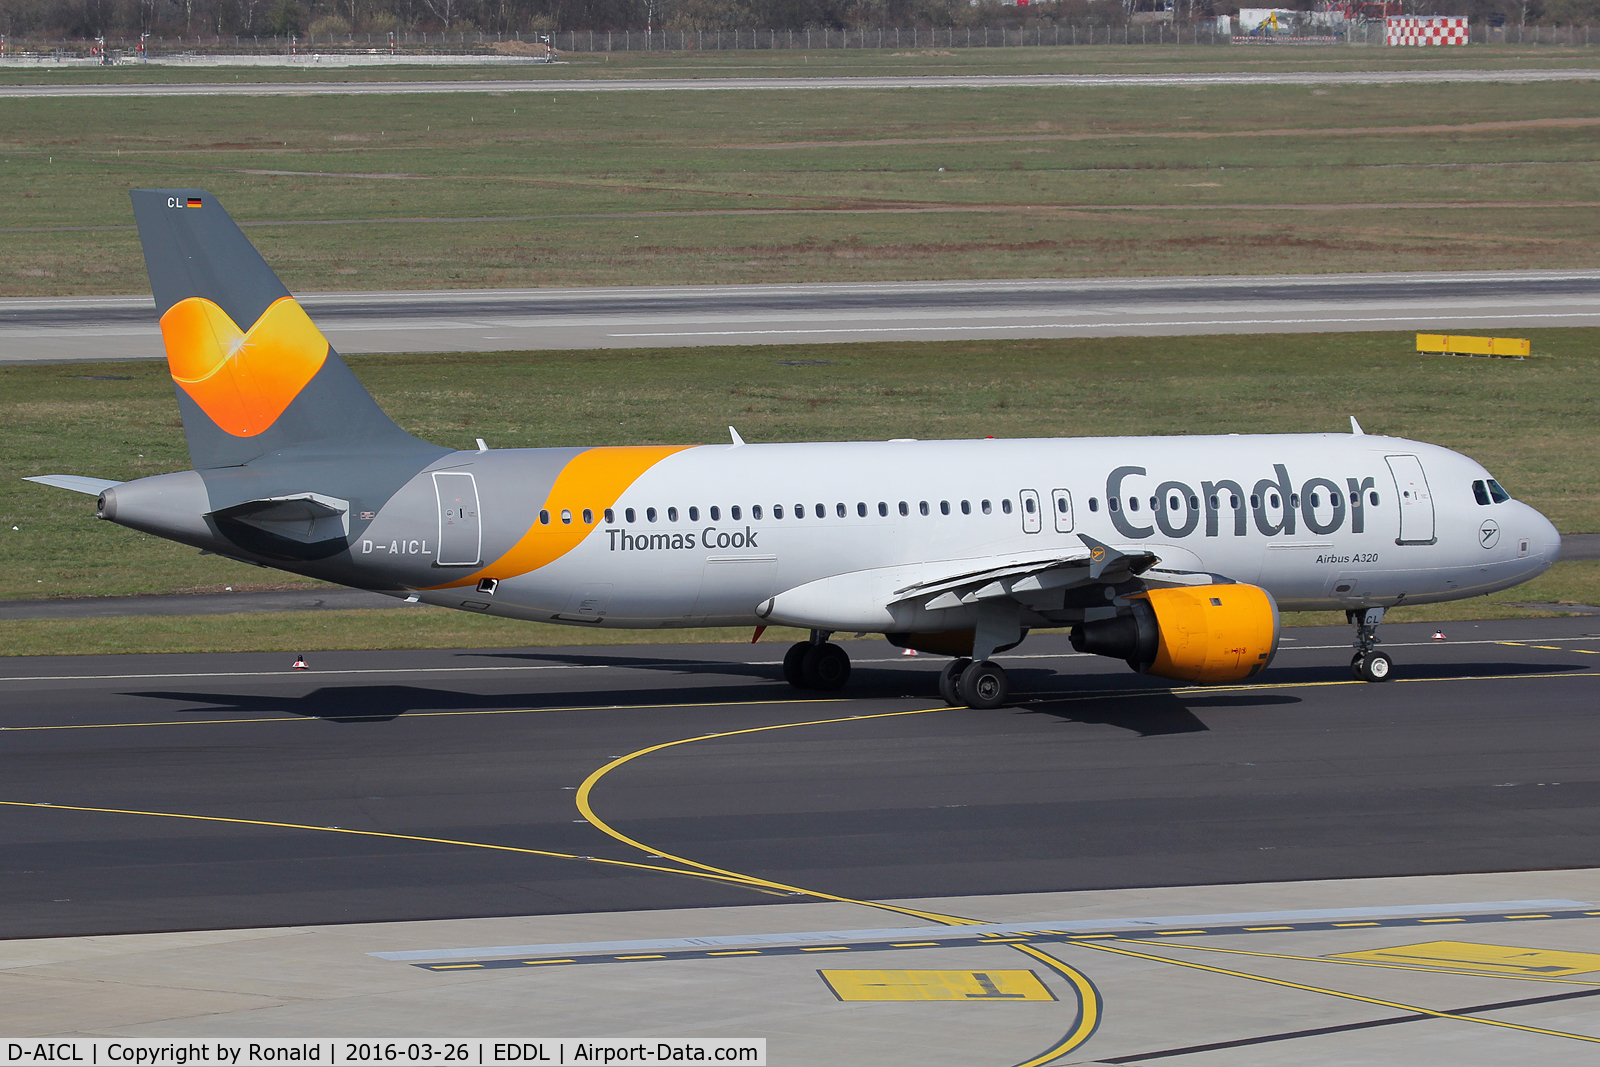 D-AICL, 2001 Airbus A320-212 C/N 1437, at dus